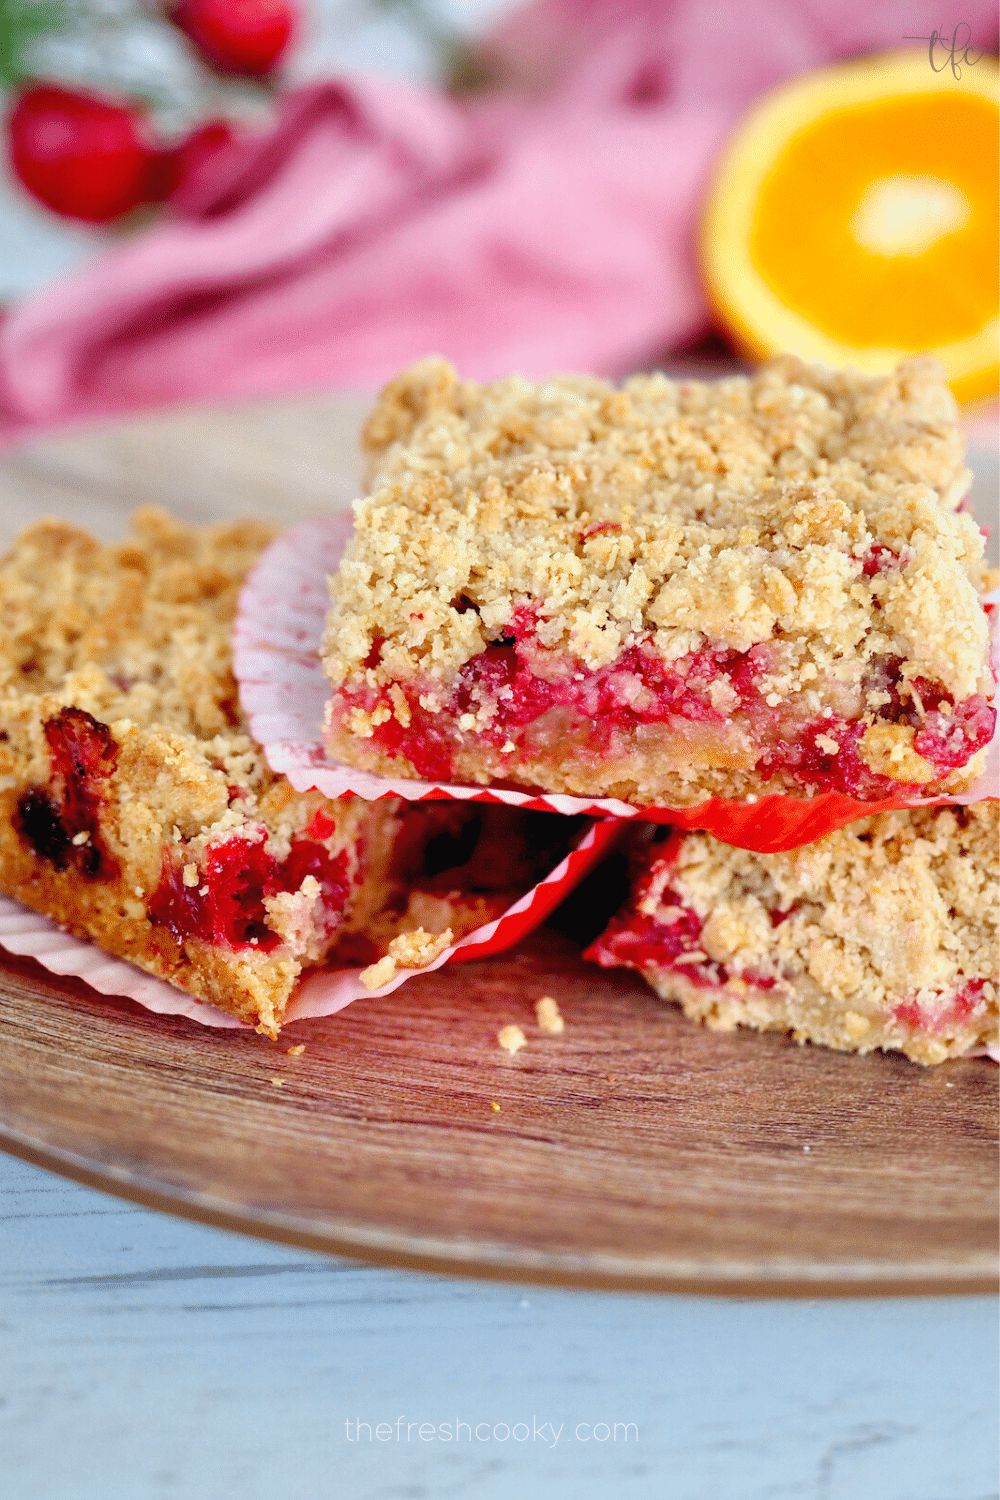 Oatmeal Cranberry Crumb Bars sliced into squares on a plate with an orange in the background.